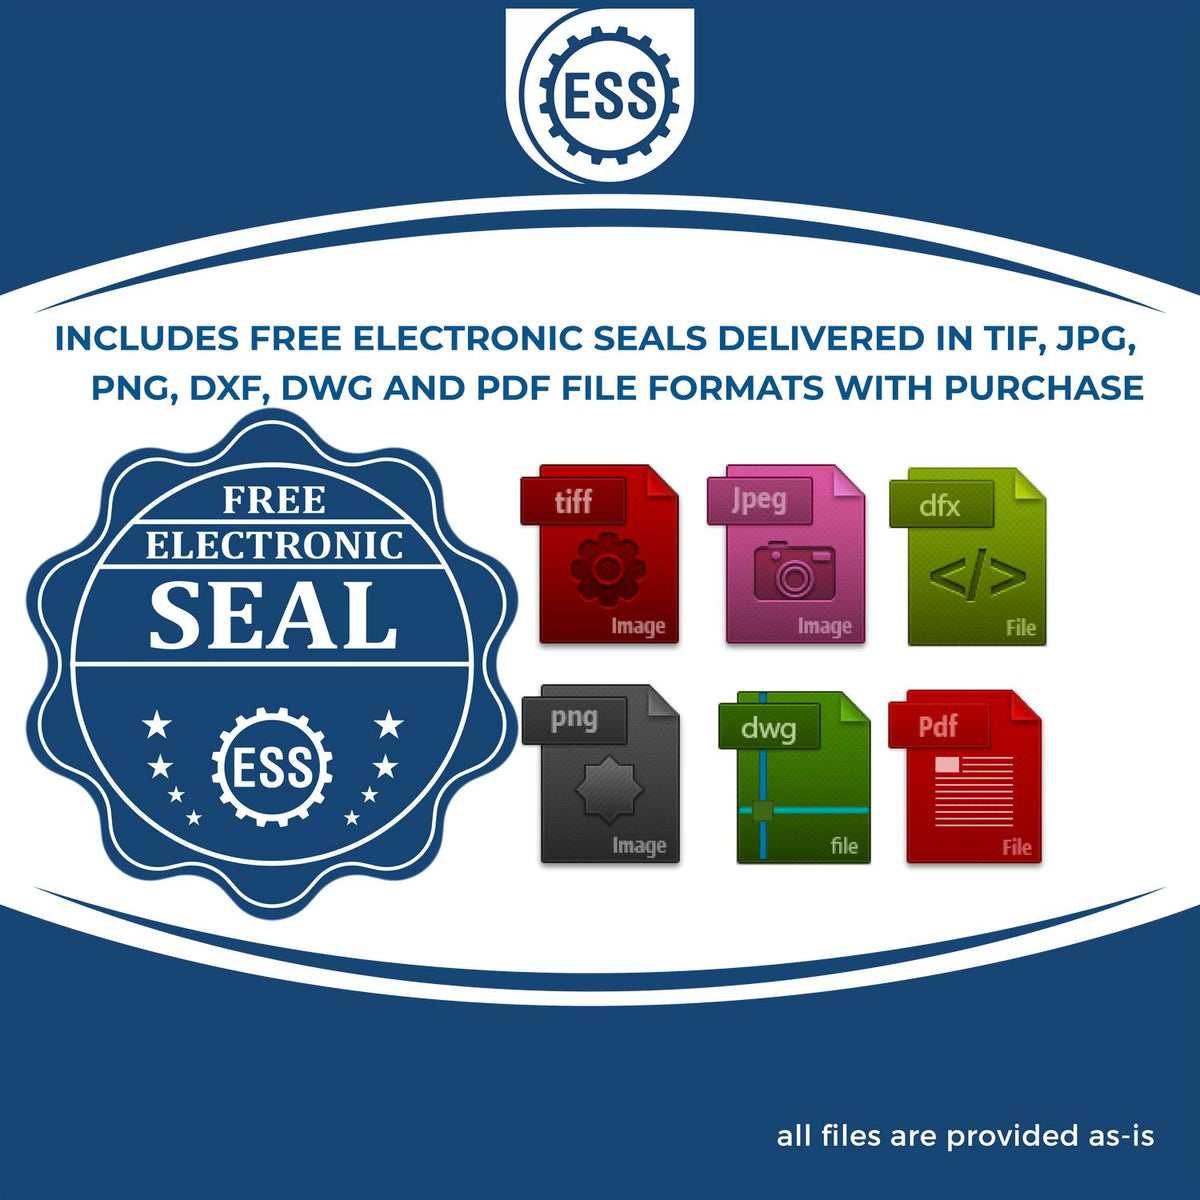 An infographic for the free electronic seal for the Heavy Duty Cast Iron Wyoming Engineer Seal Embosser illustrating the different file type icons such as DXF, DWG, TIF, JPG and PNG.